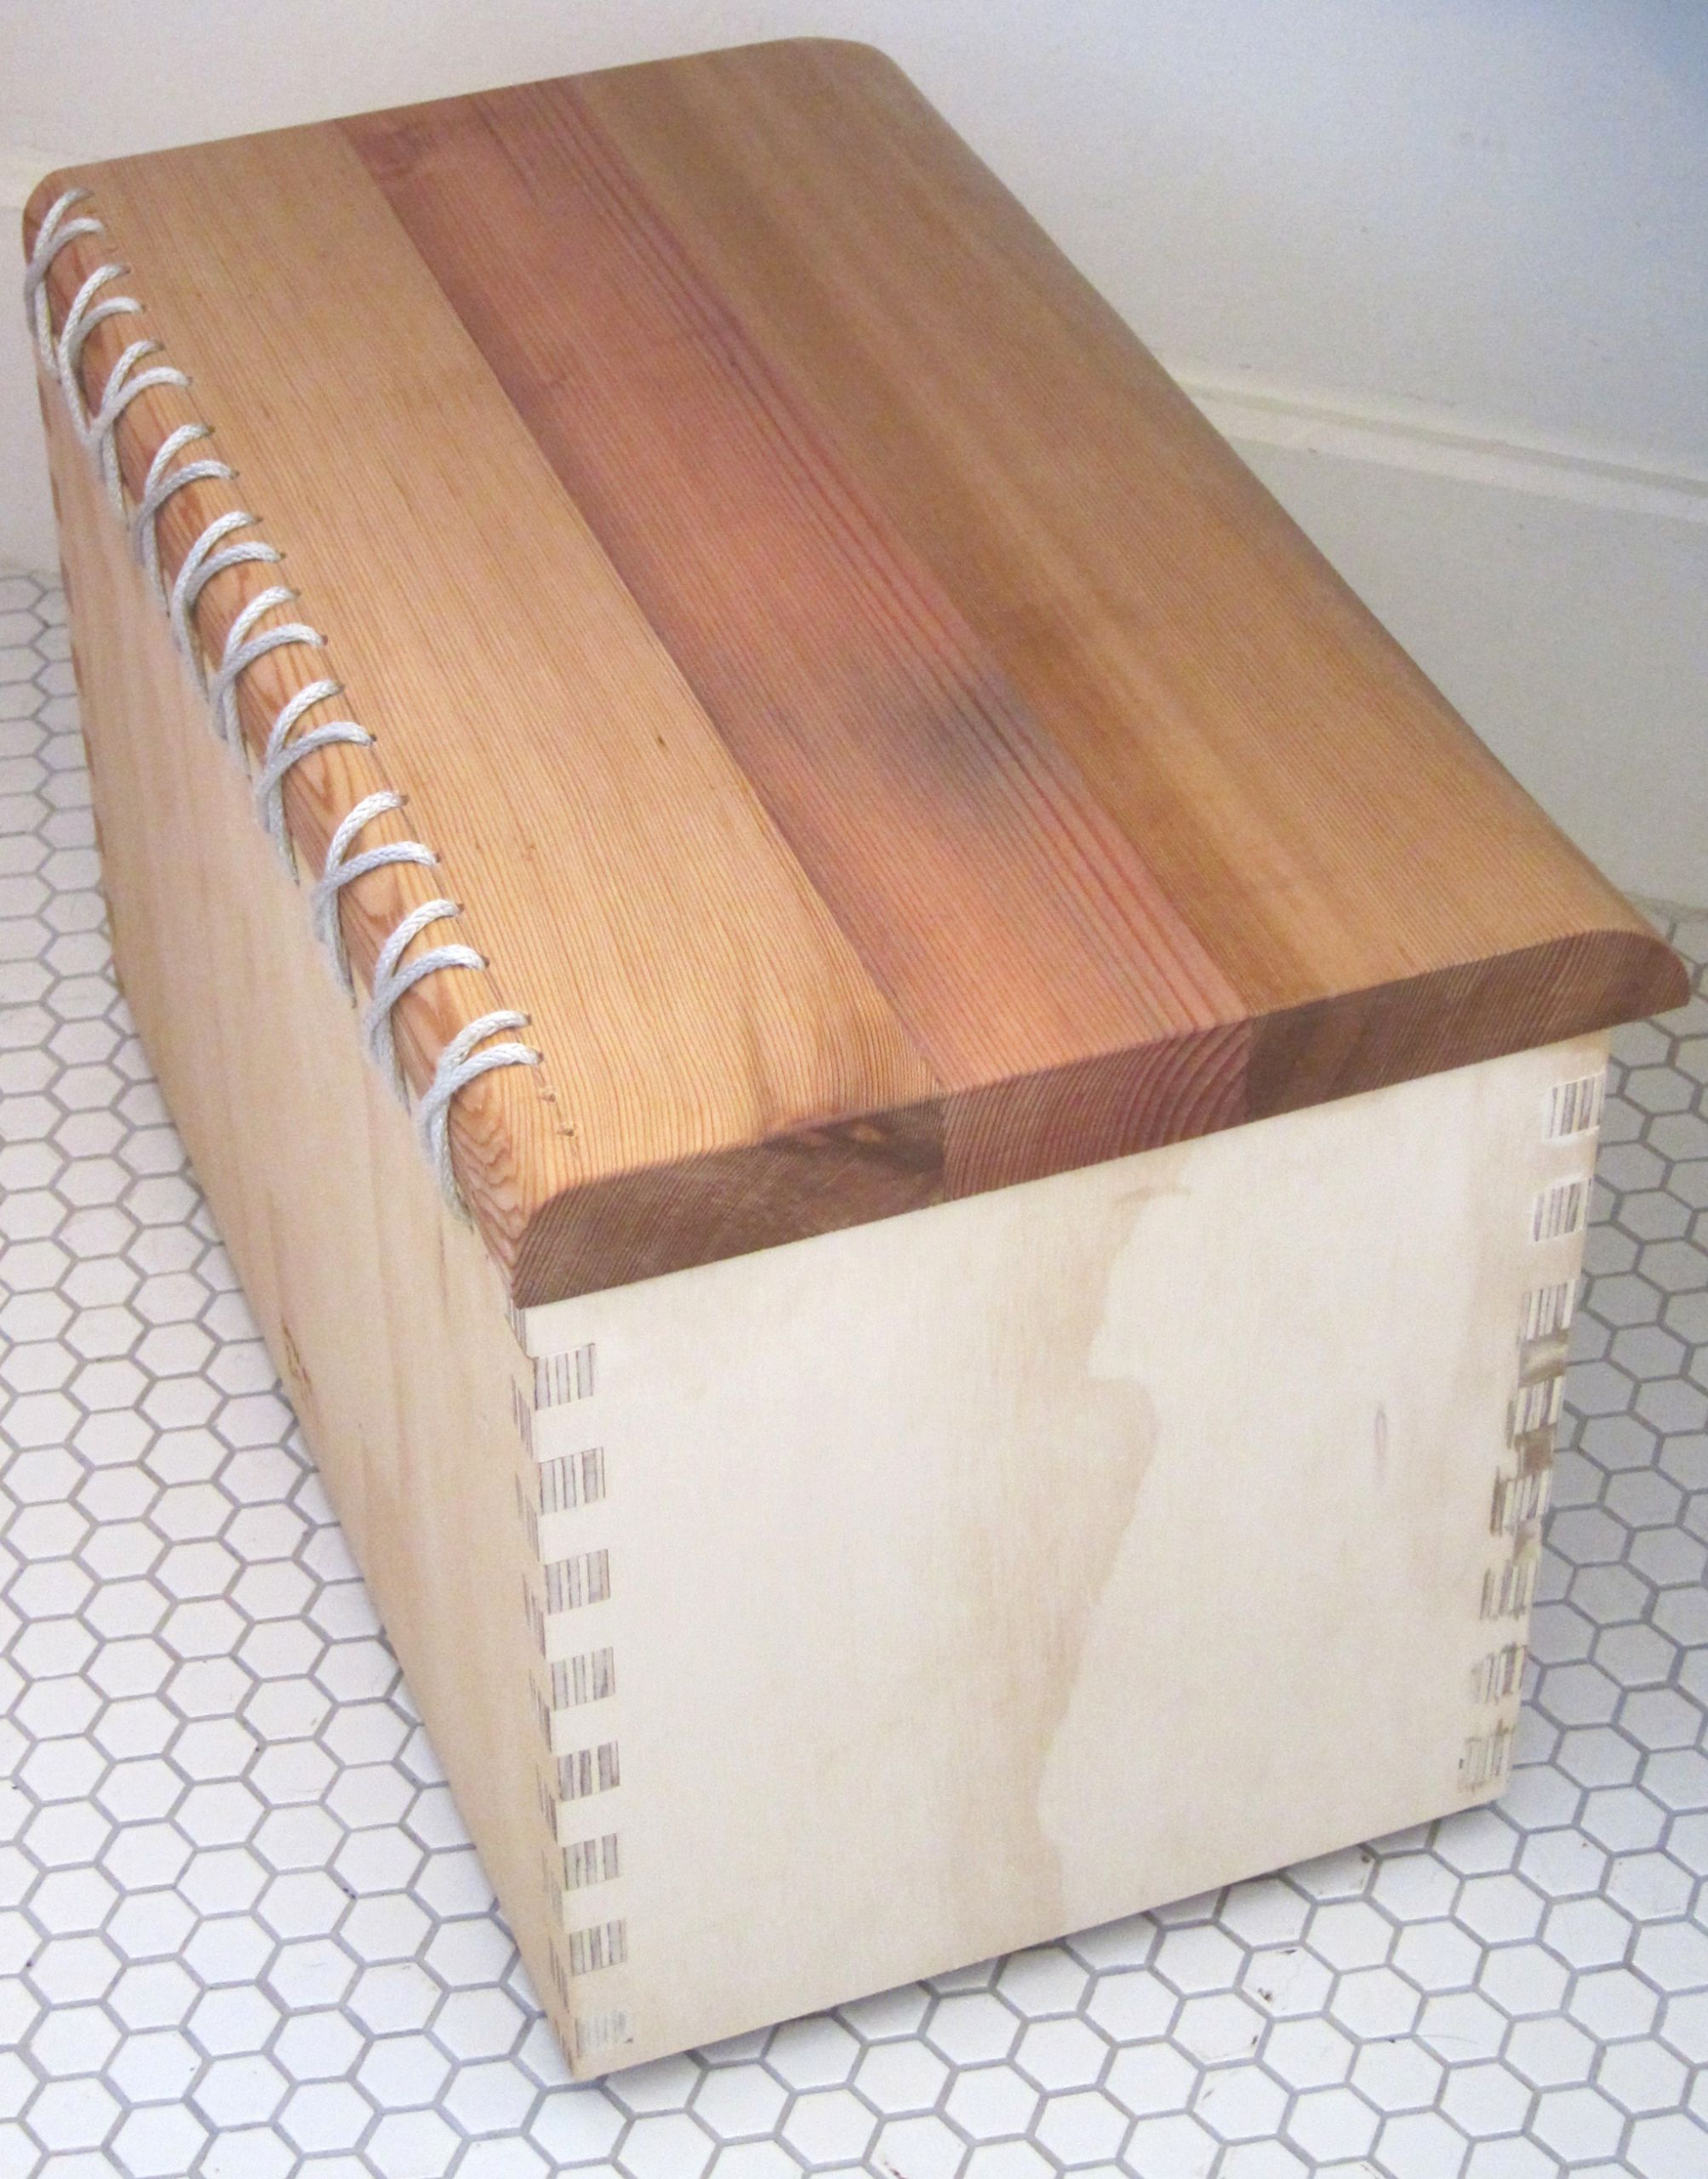 DIY Wood Chest Plans
 DIY Treasure Chest Plans Pine Wooden PDF wooden projects